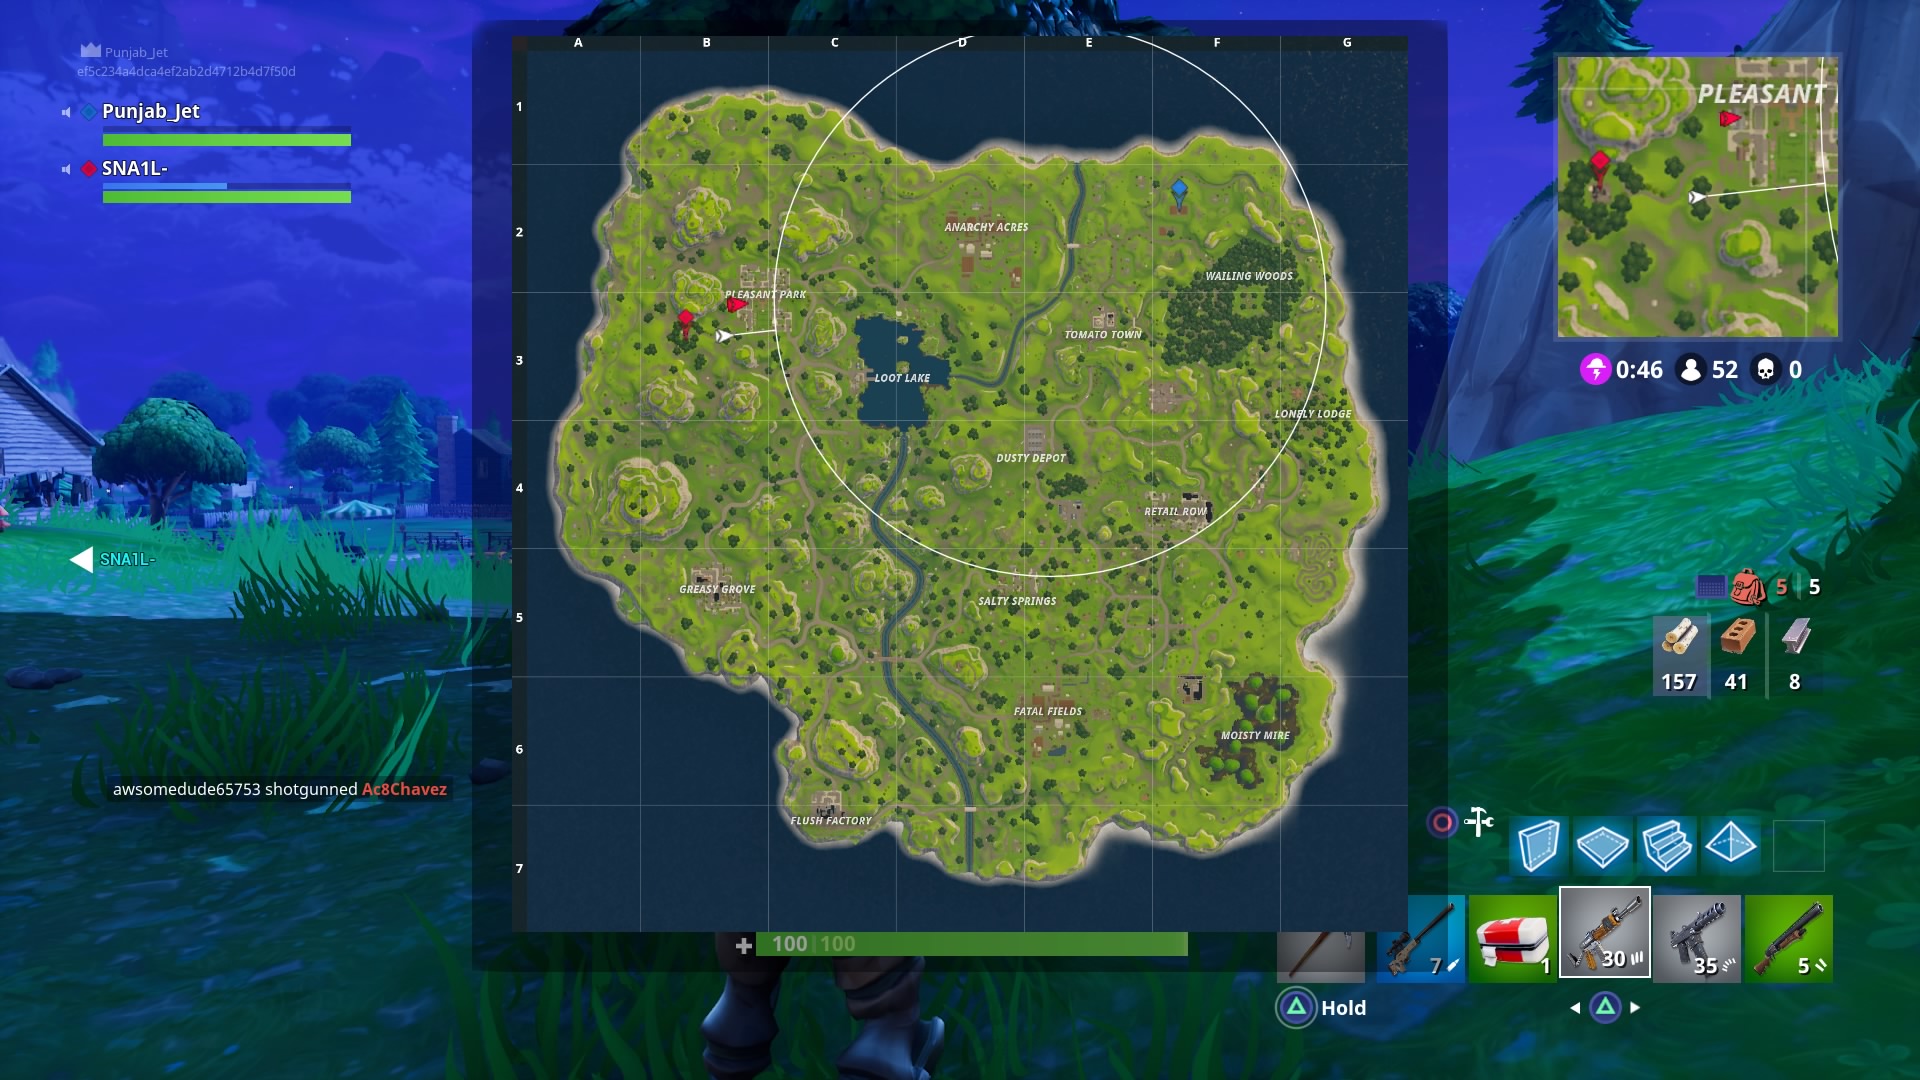 Free Download Fortnite Map Overview Wallpaper 63008 1920x1080px